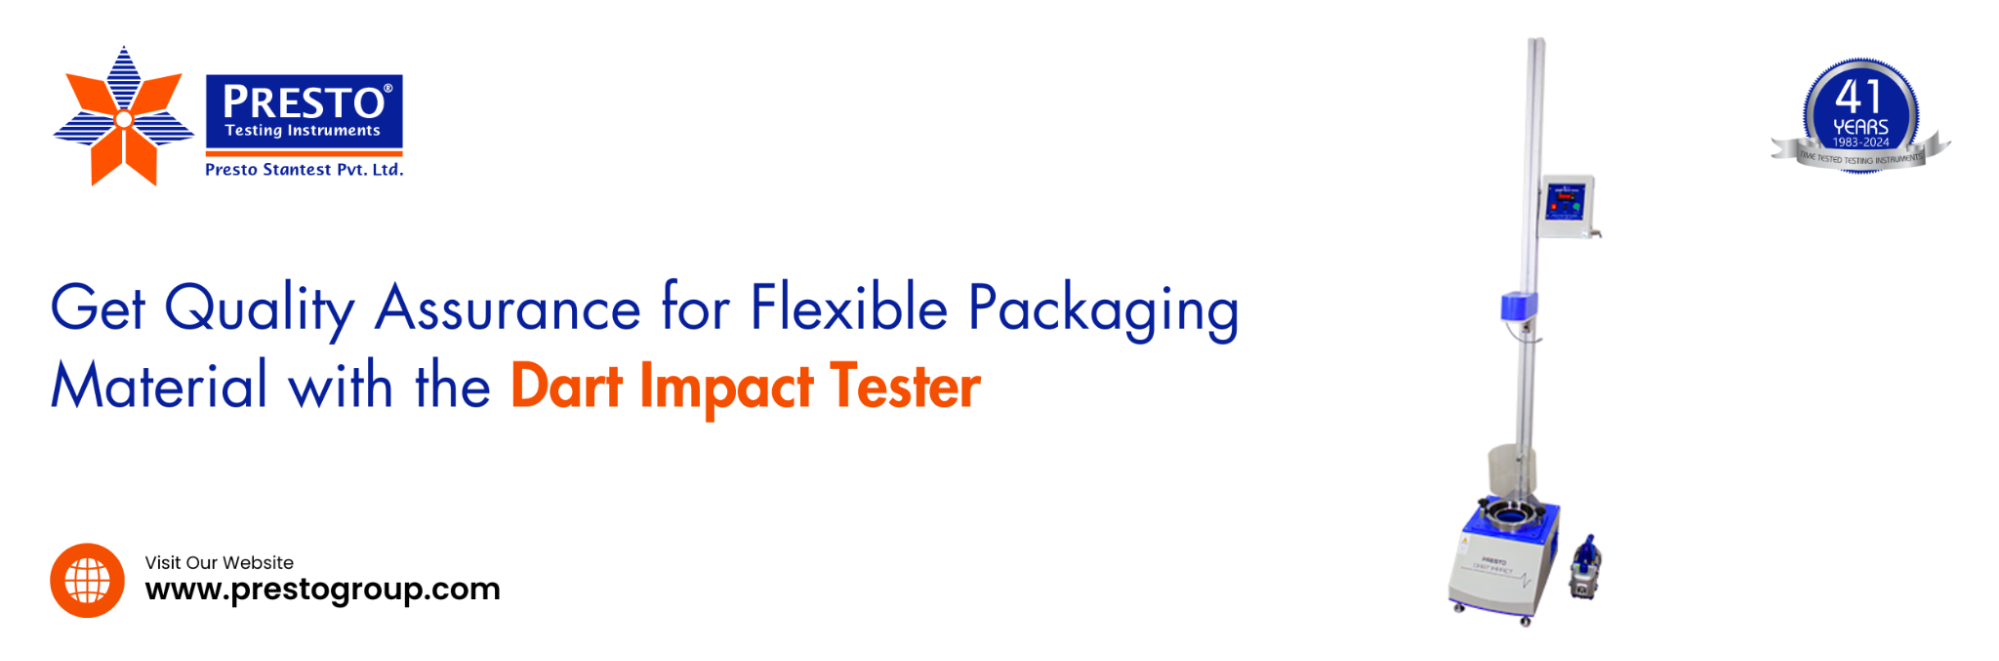 Get Quality Assurance for Flexible Packaging Material with the Dart Impact Tester 